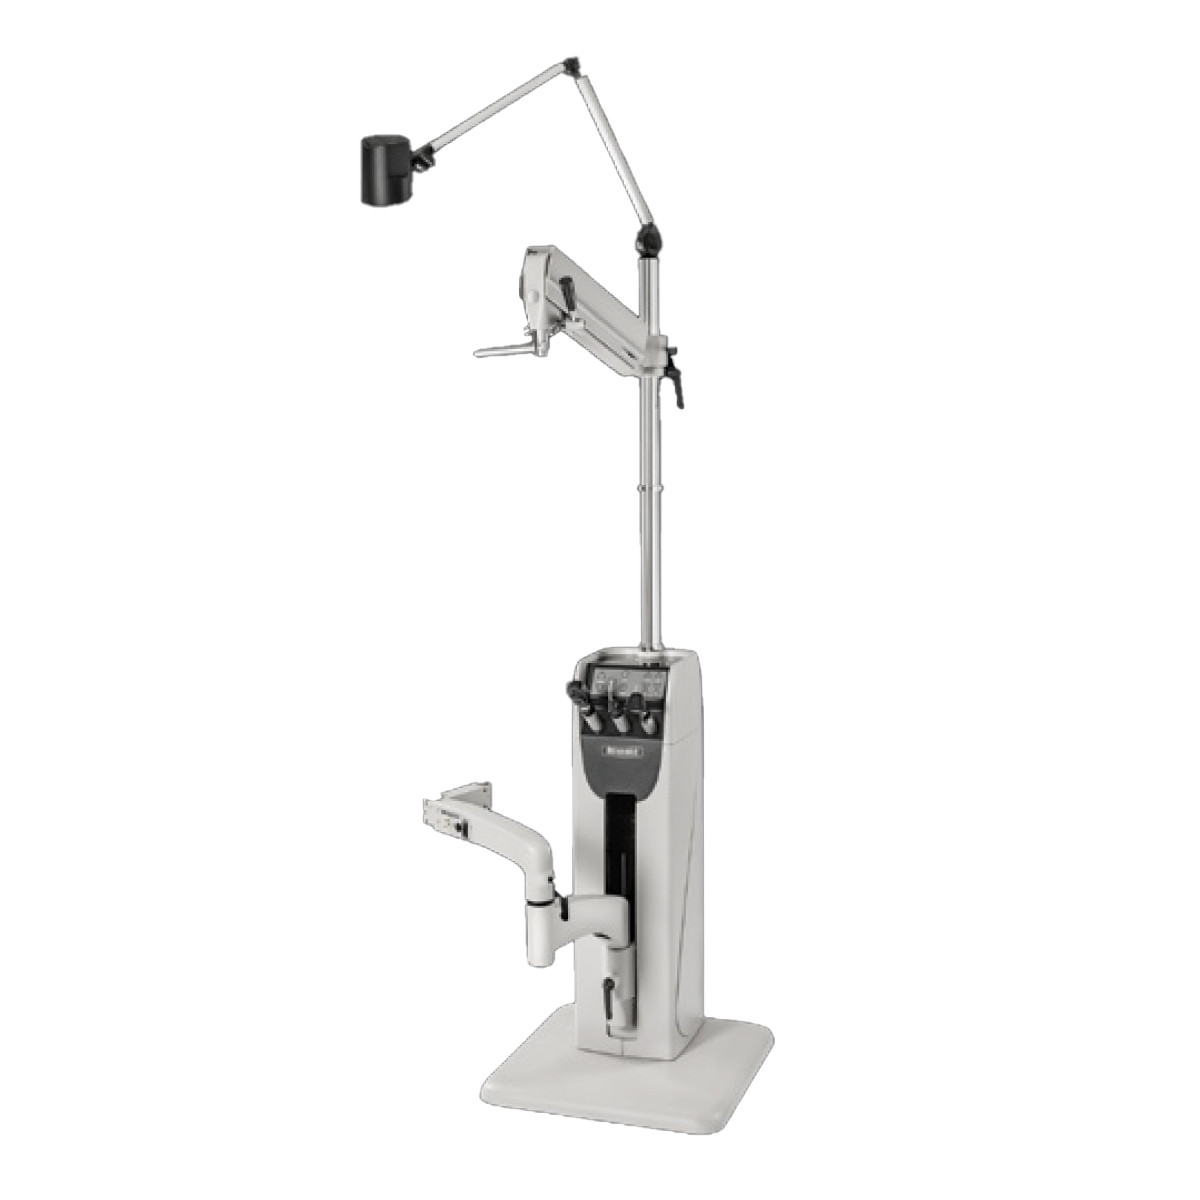 Reliance 7900 Instrument Stand